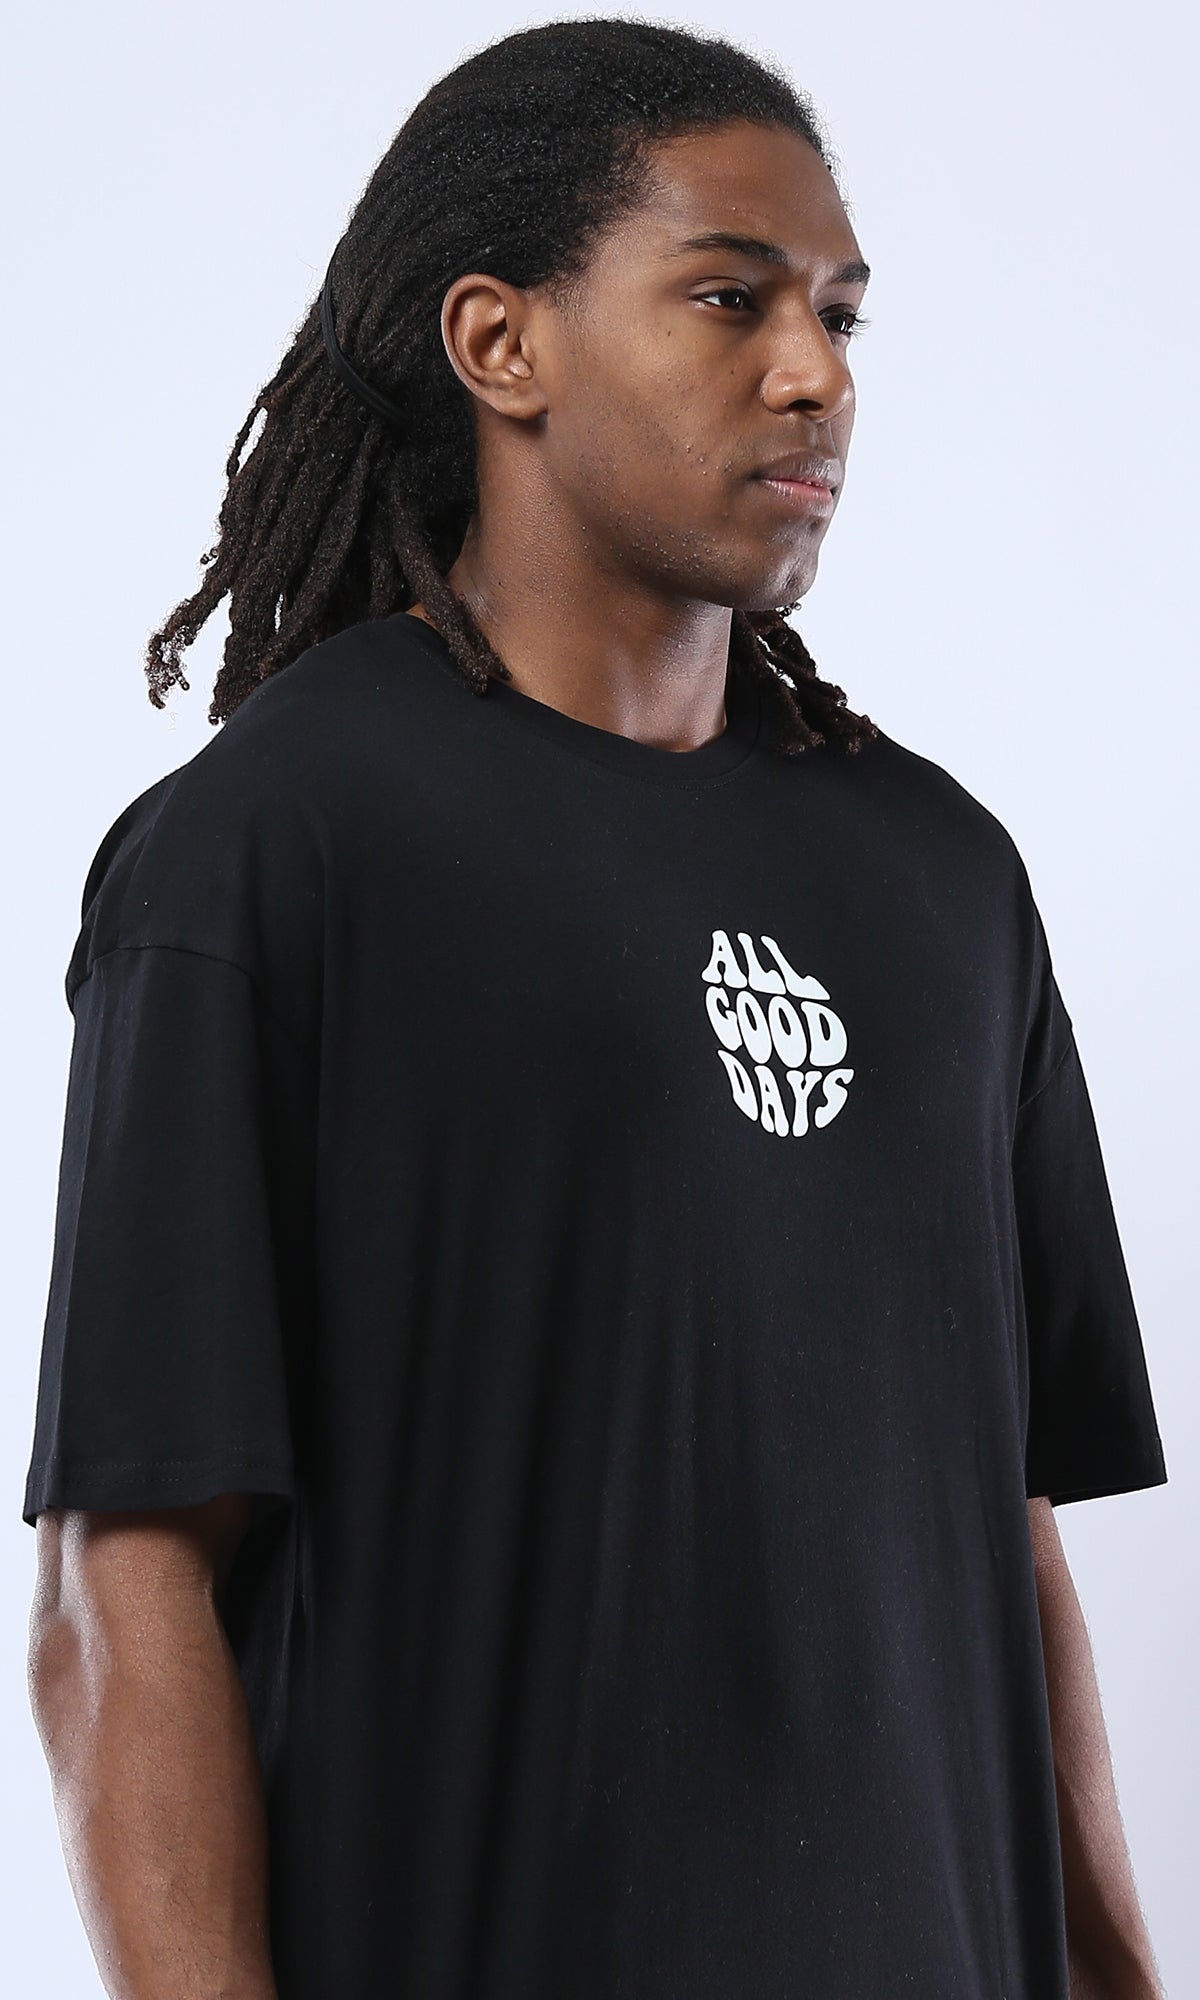 O178396 Printed " All Good Days" Casual Cotton Black Tee